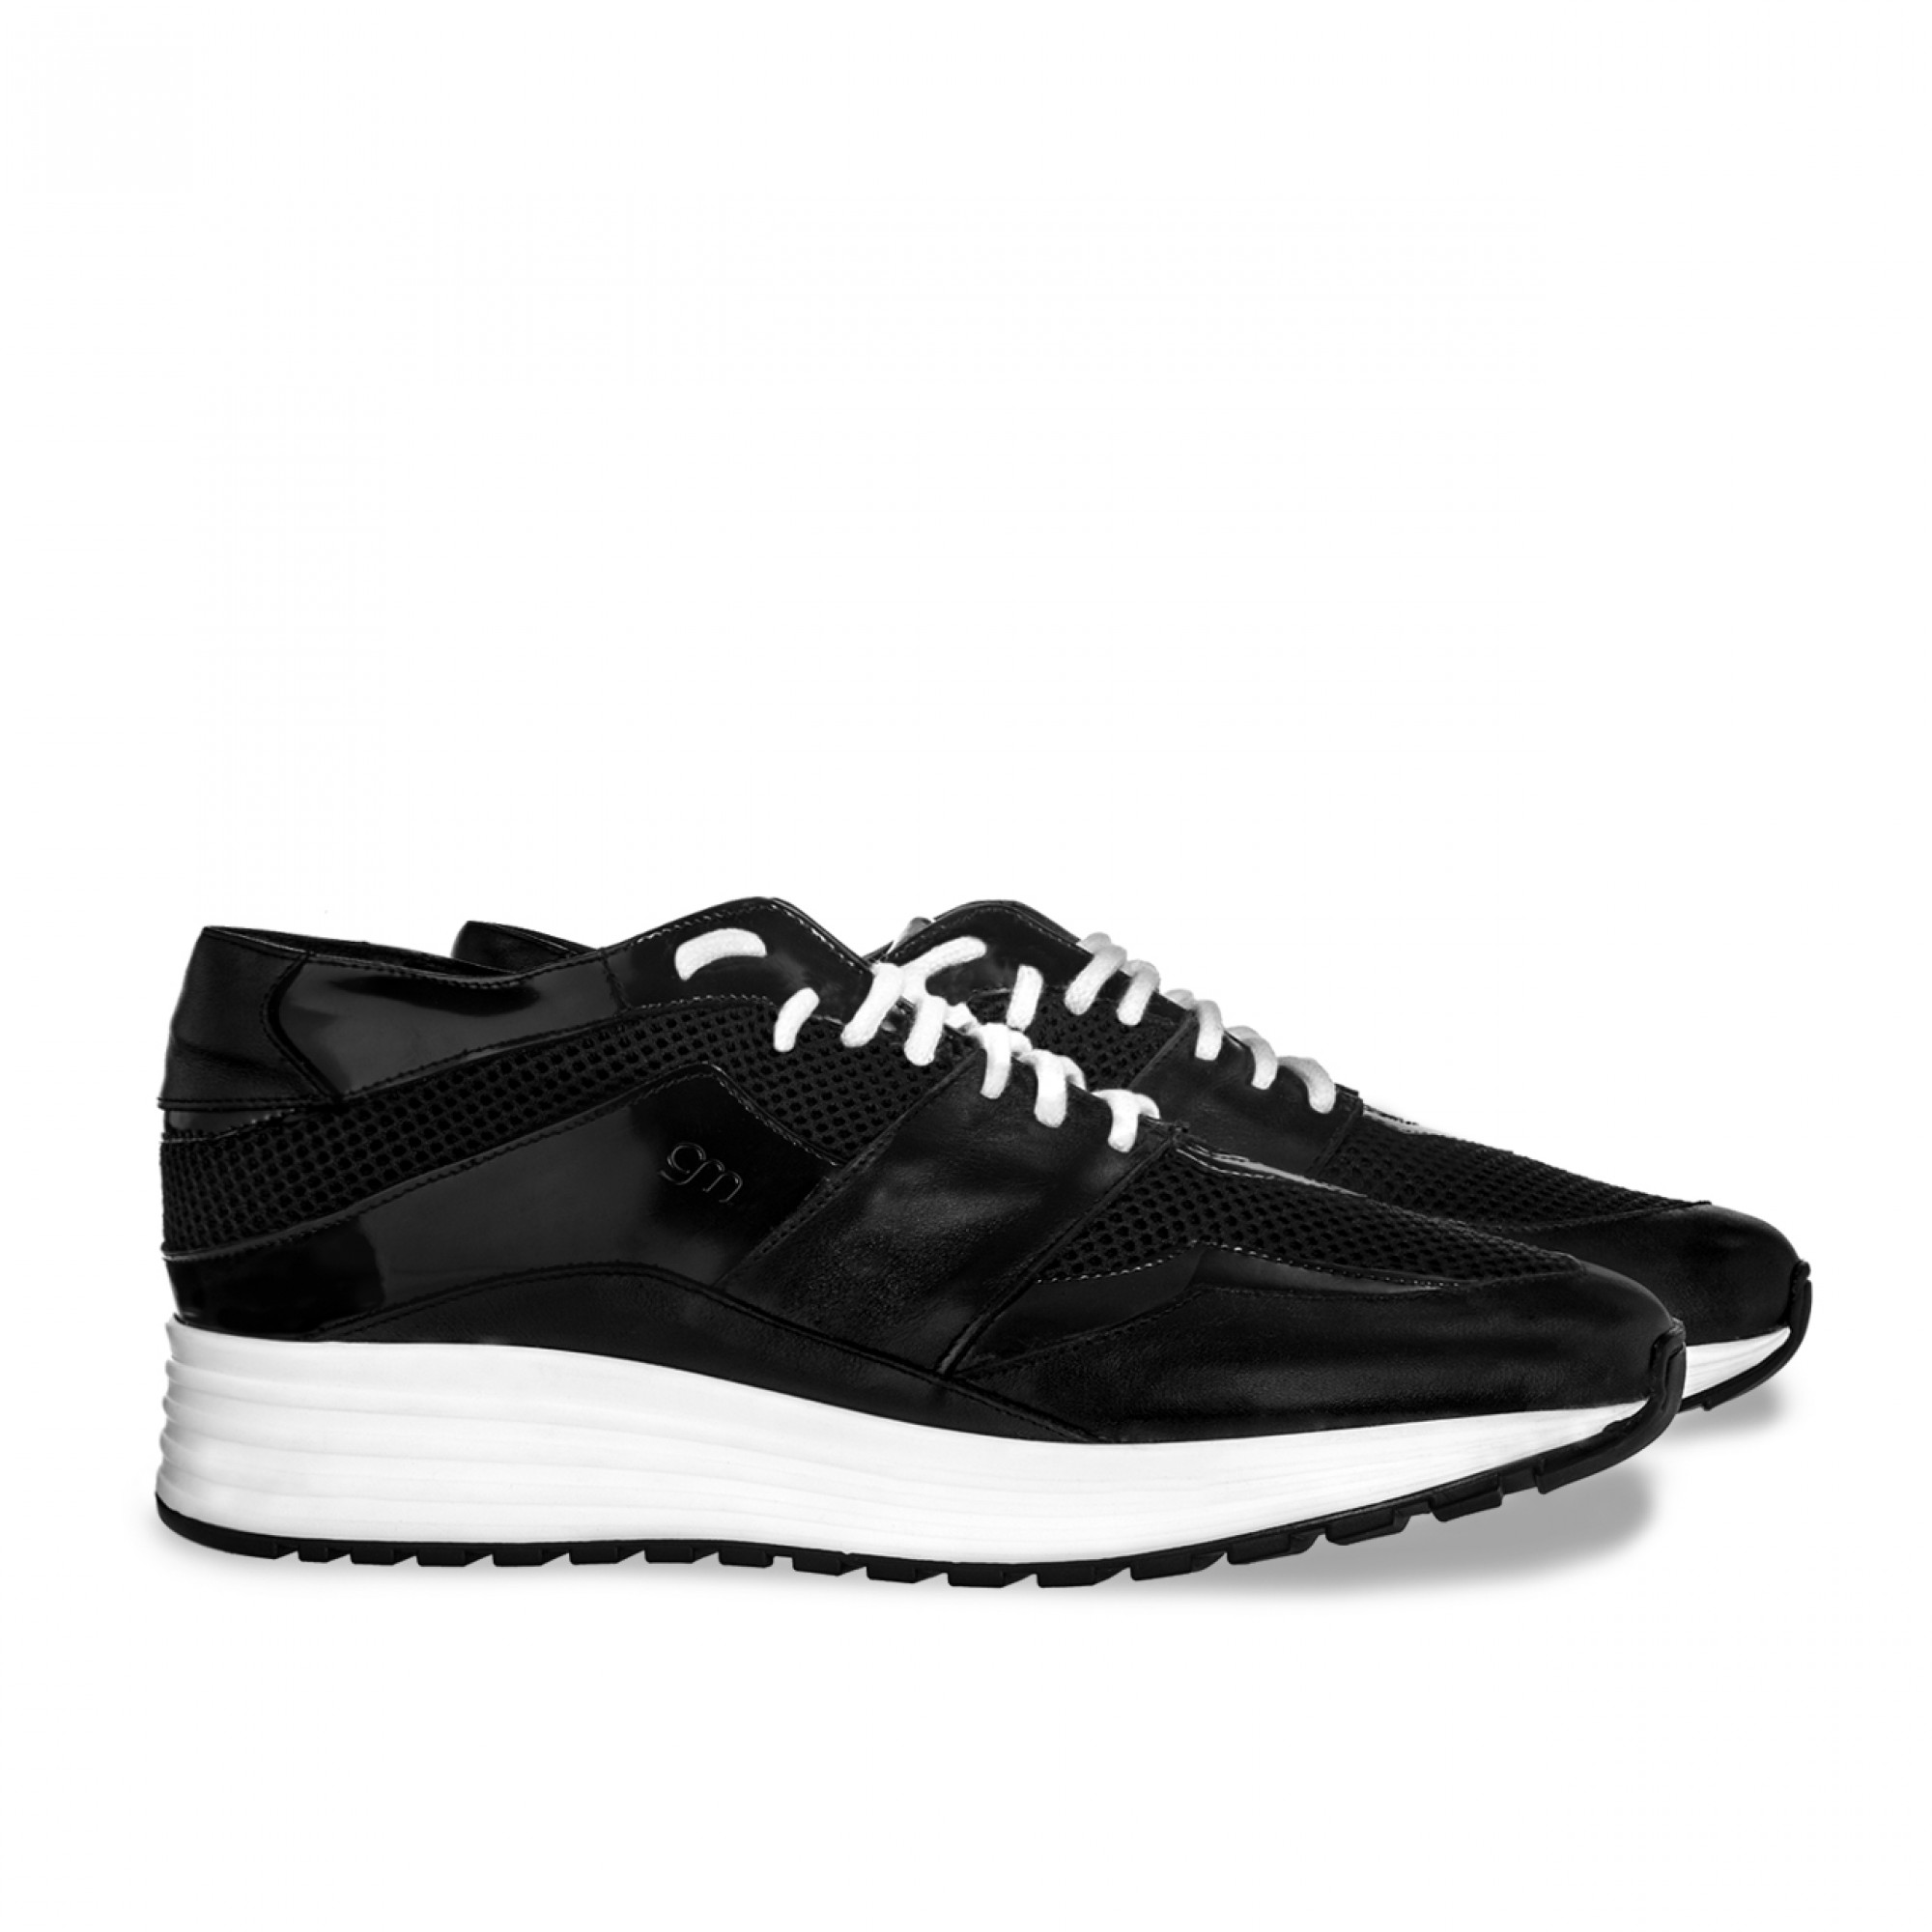 Varenne Black - Elevator Sneakers in Leather/fabric mix from 2.4 to 3.1 ...